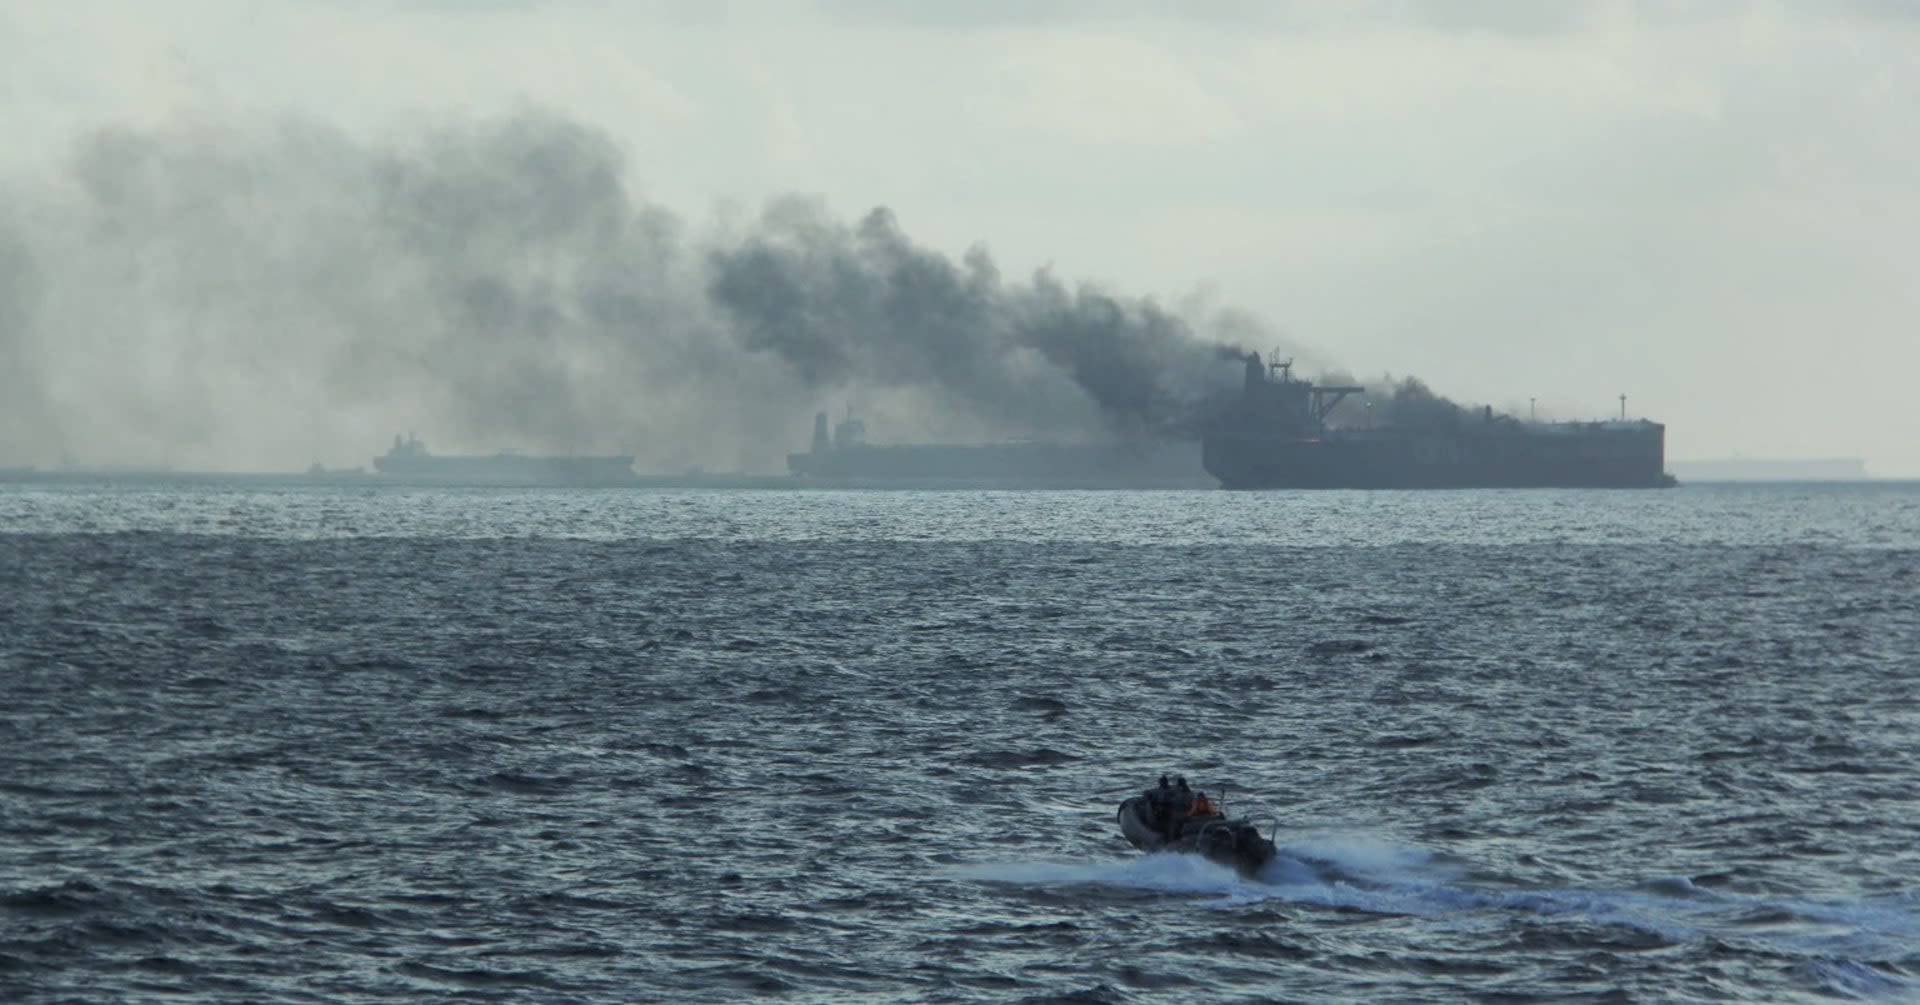 Oil tankers on fire after colliding close to Singapore, crew rescued